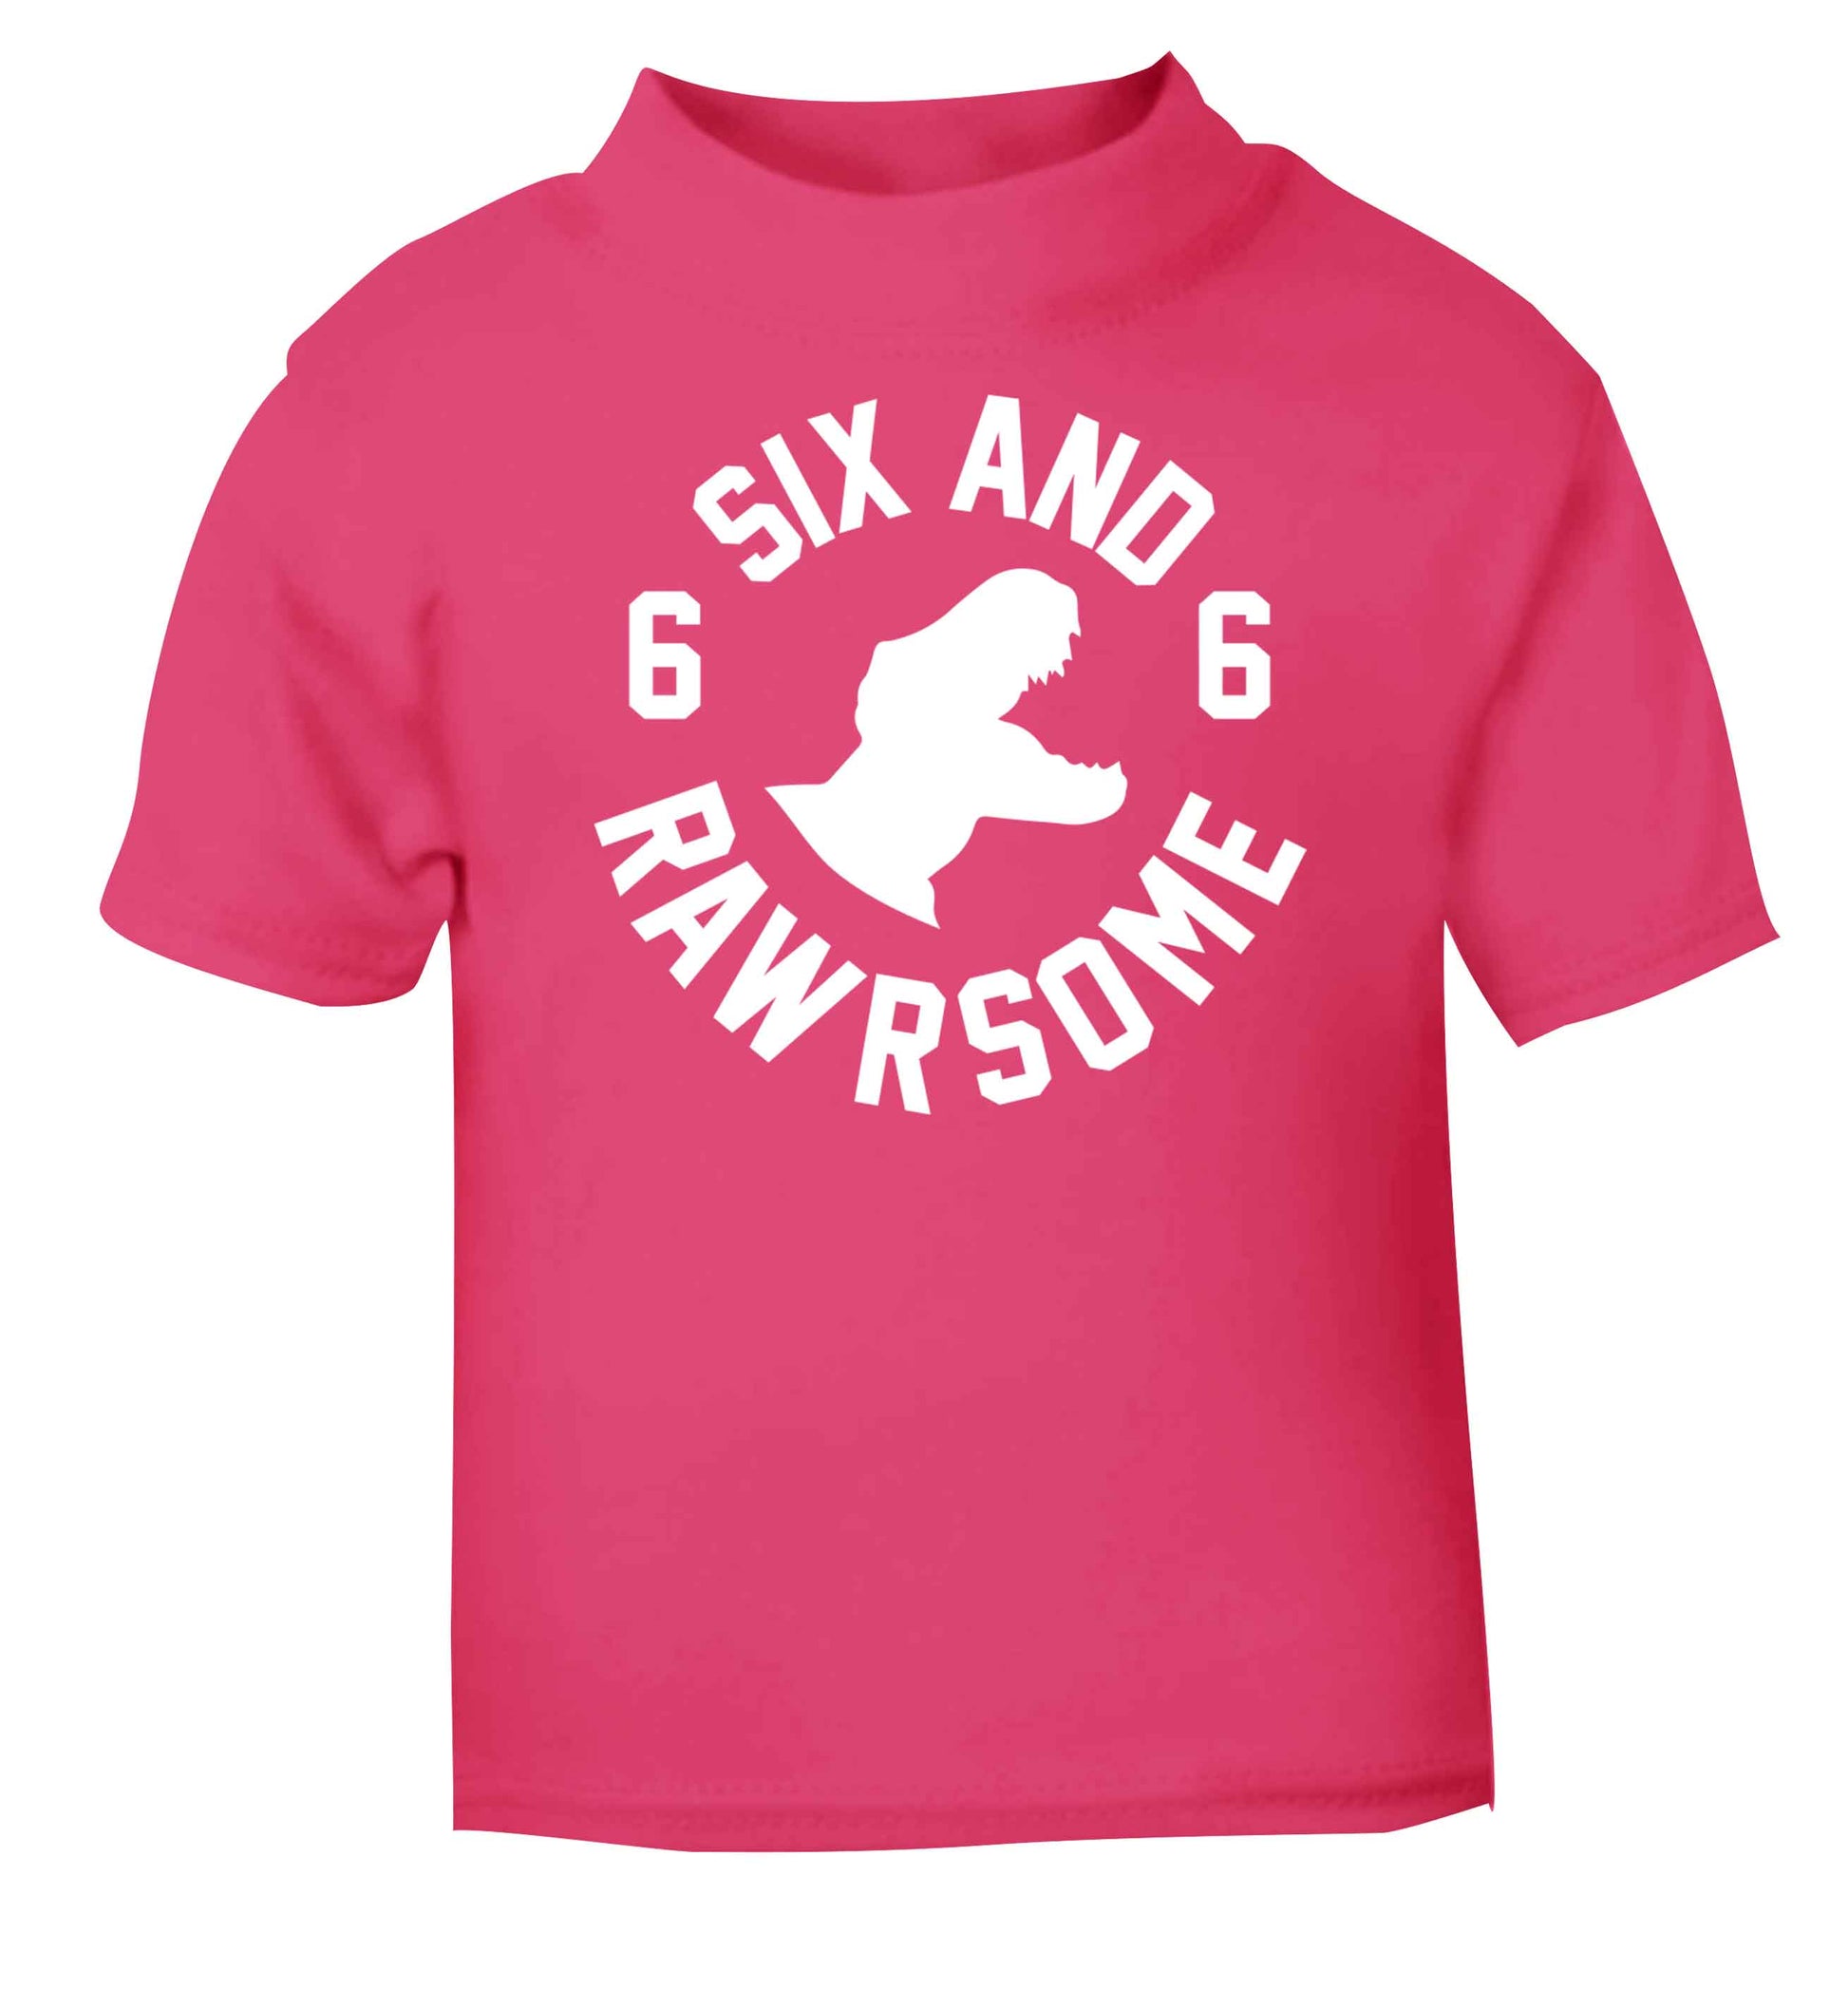 Six and rawrsome pink baby toddler Tshirt 2 Years